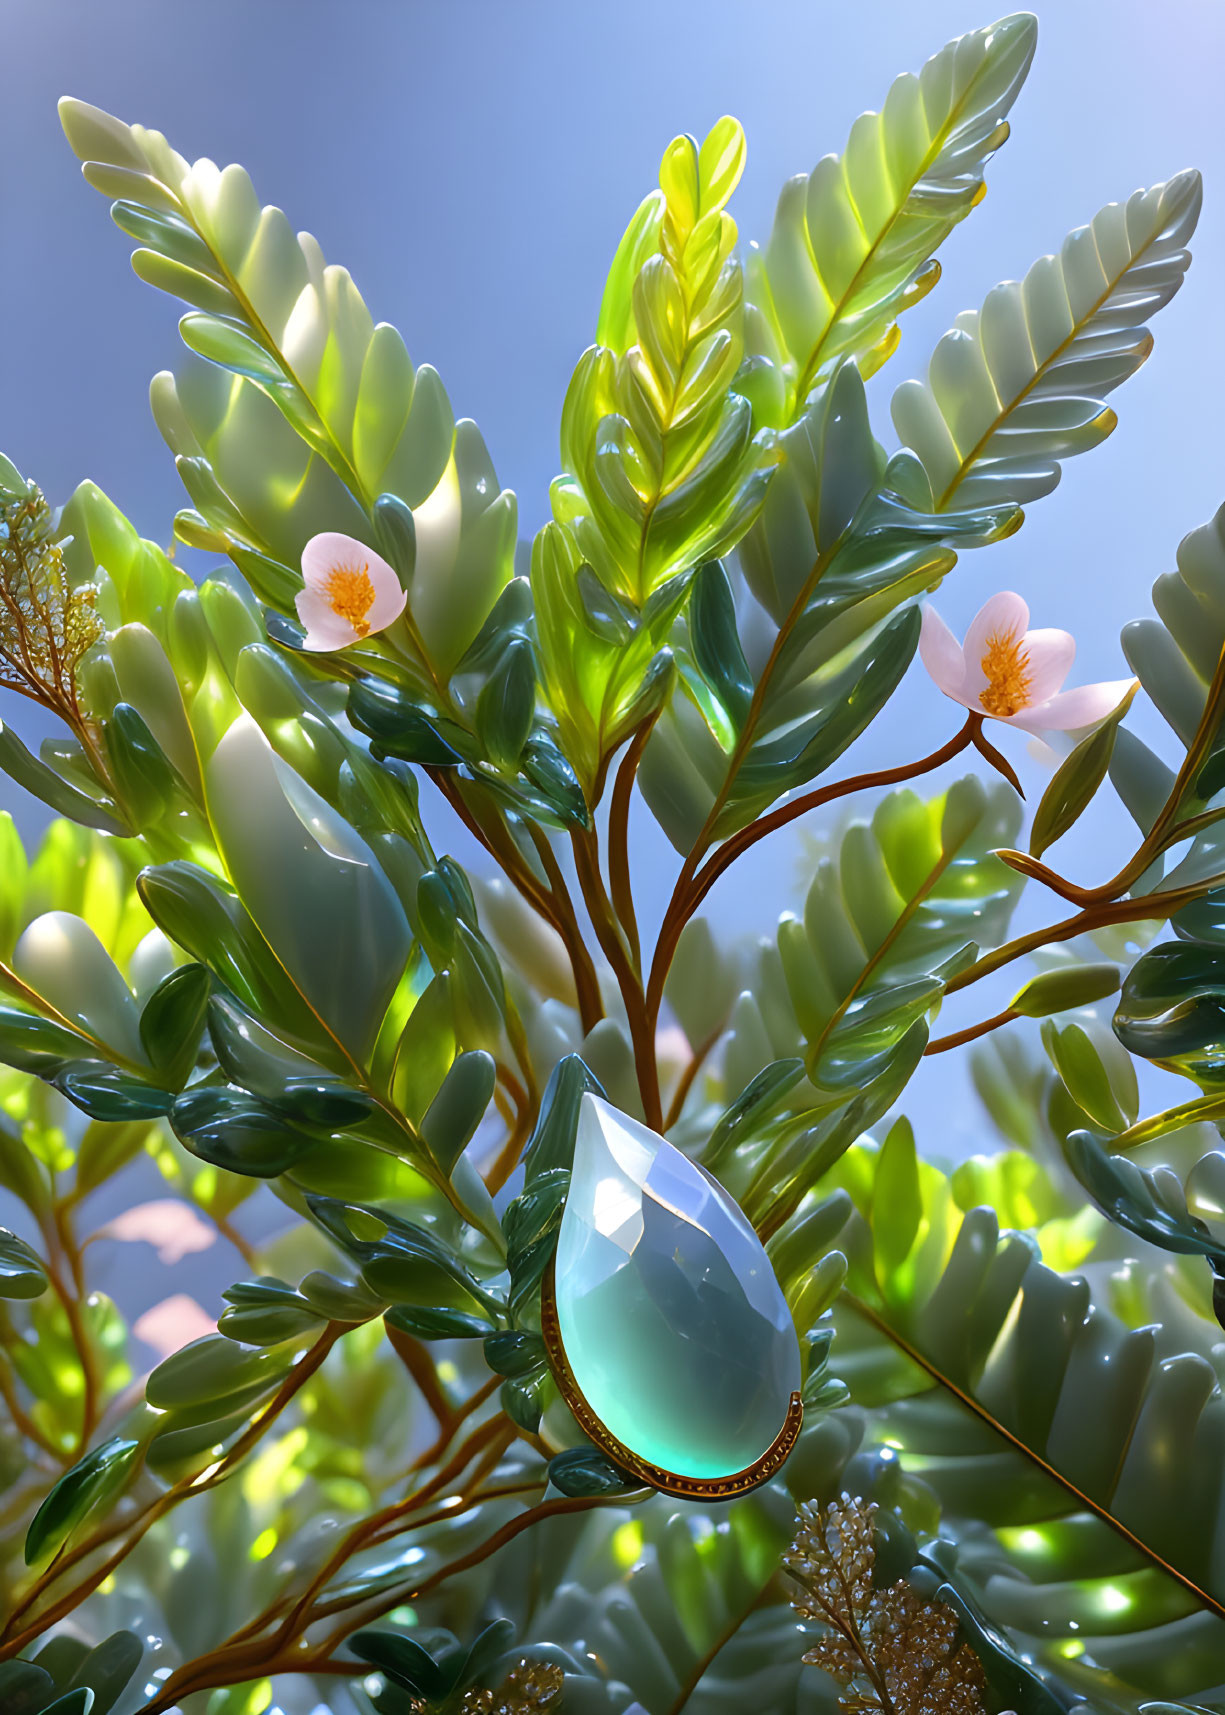 Green Leaves with Dewdrops and Blossoms Against Blue Sky